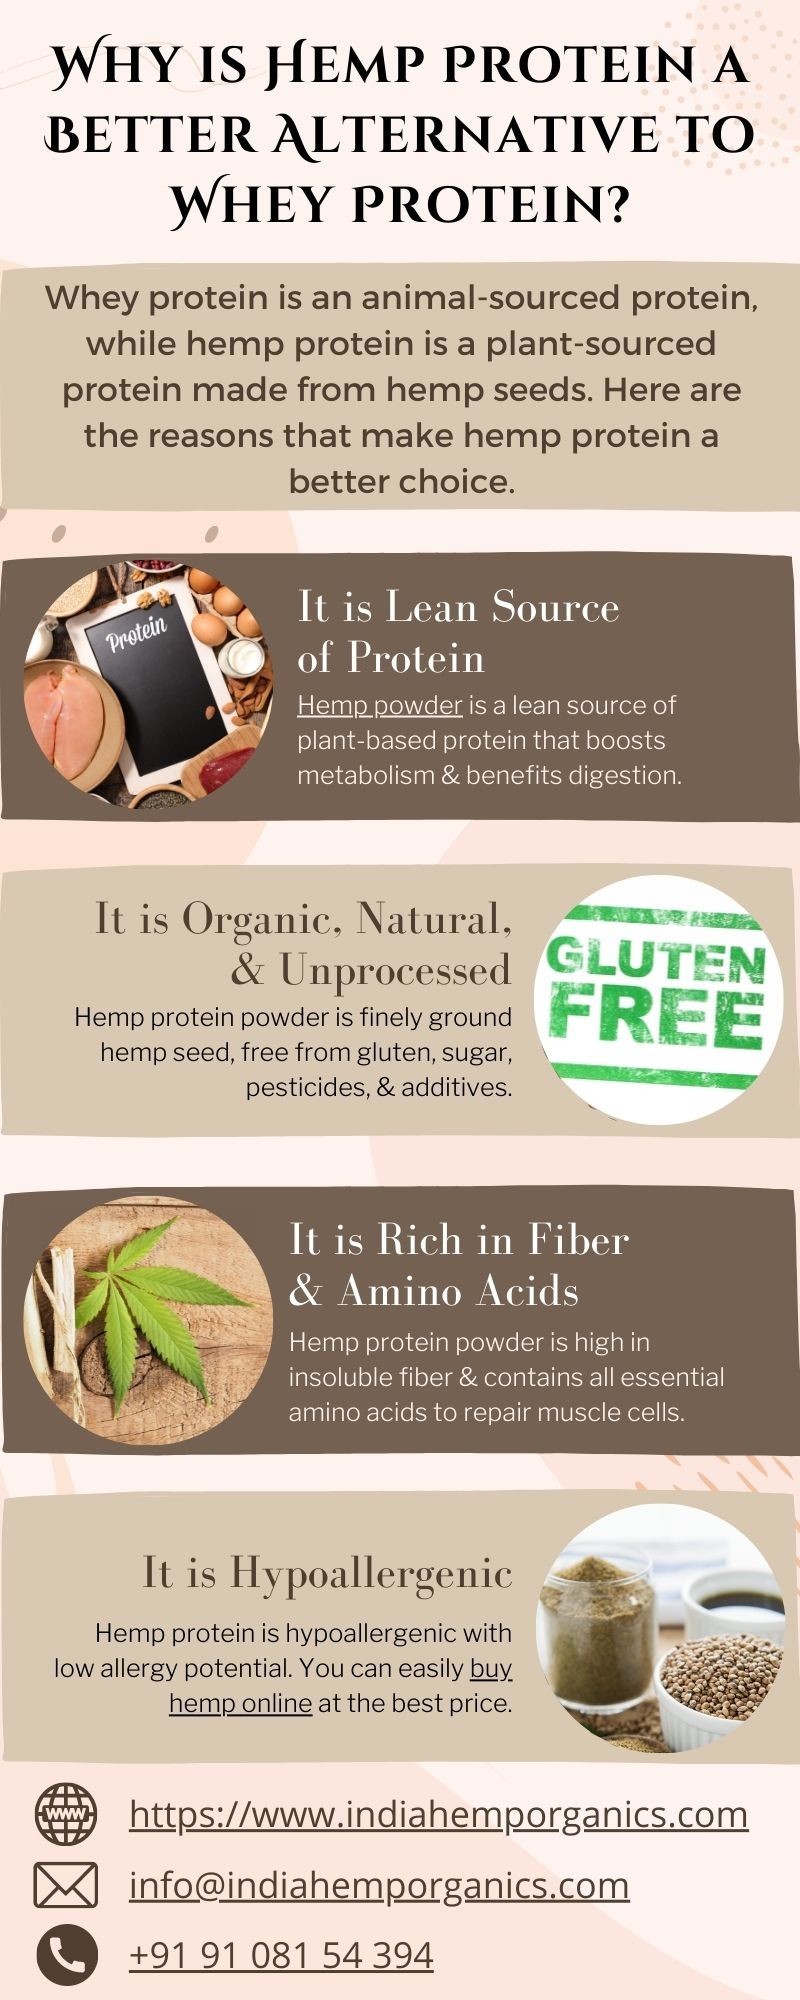 Why is Hemp Protein a Better Alternative to Whey Protein?